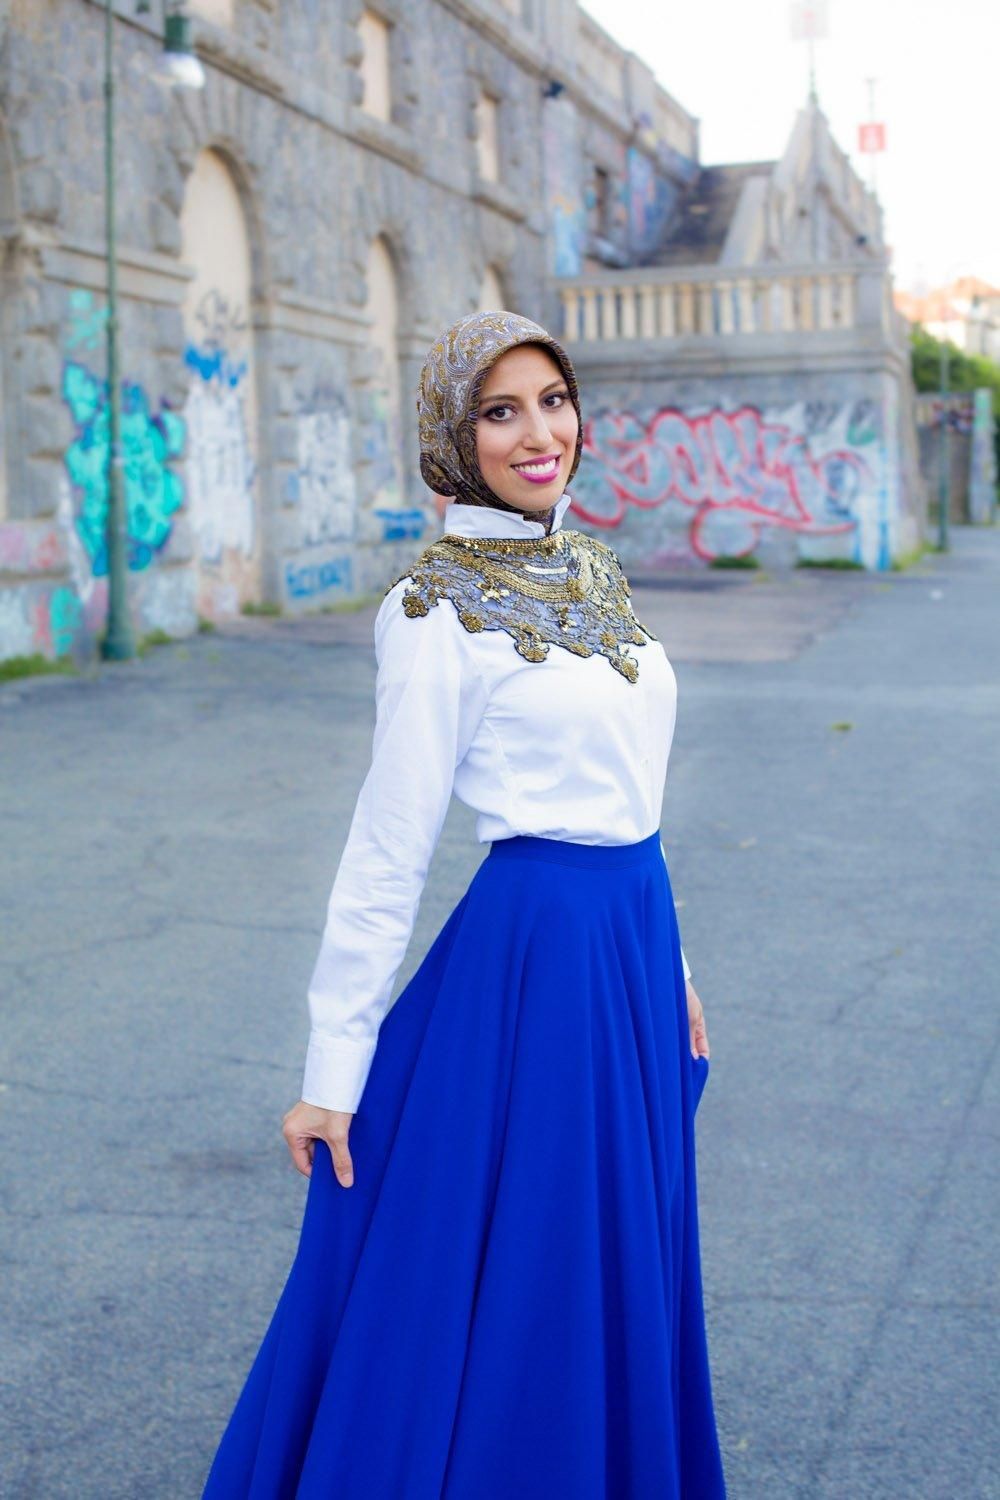 10 style Guides hijab ideas